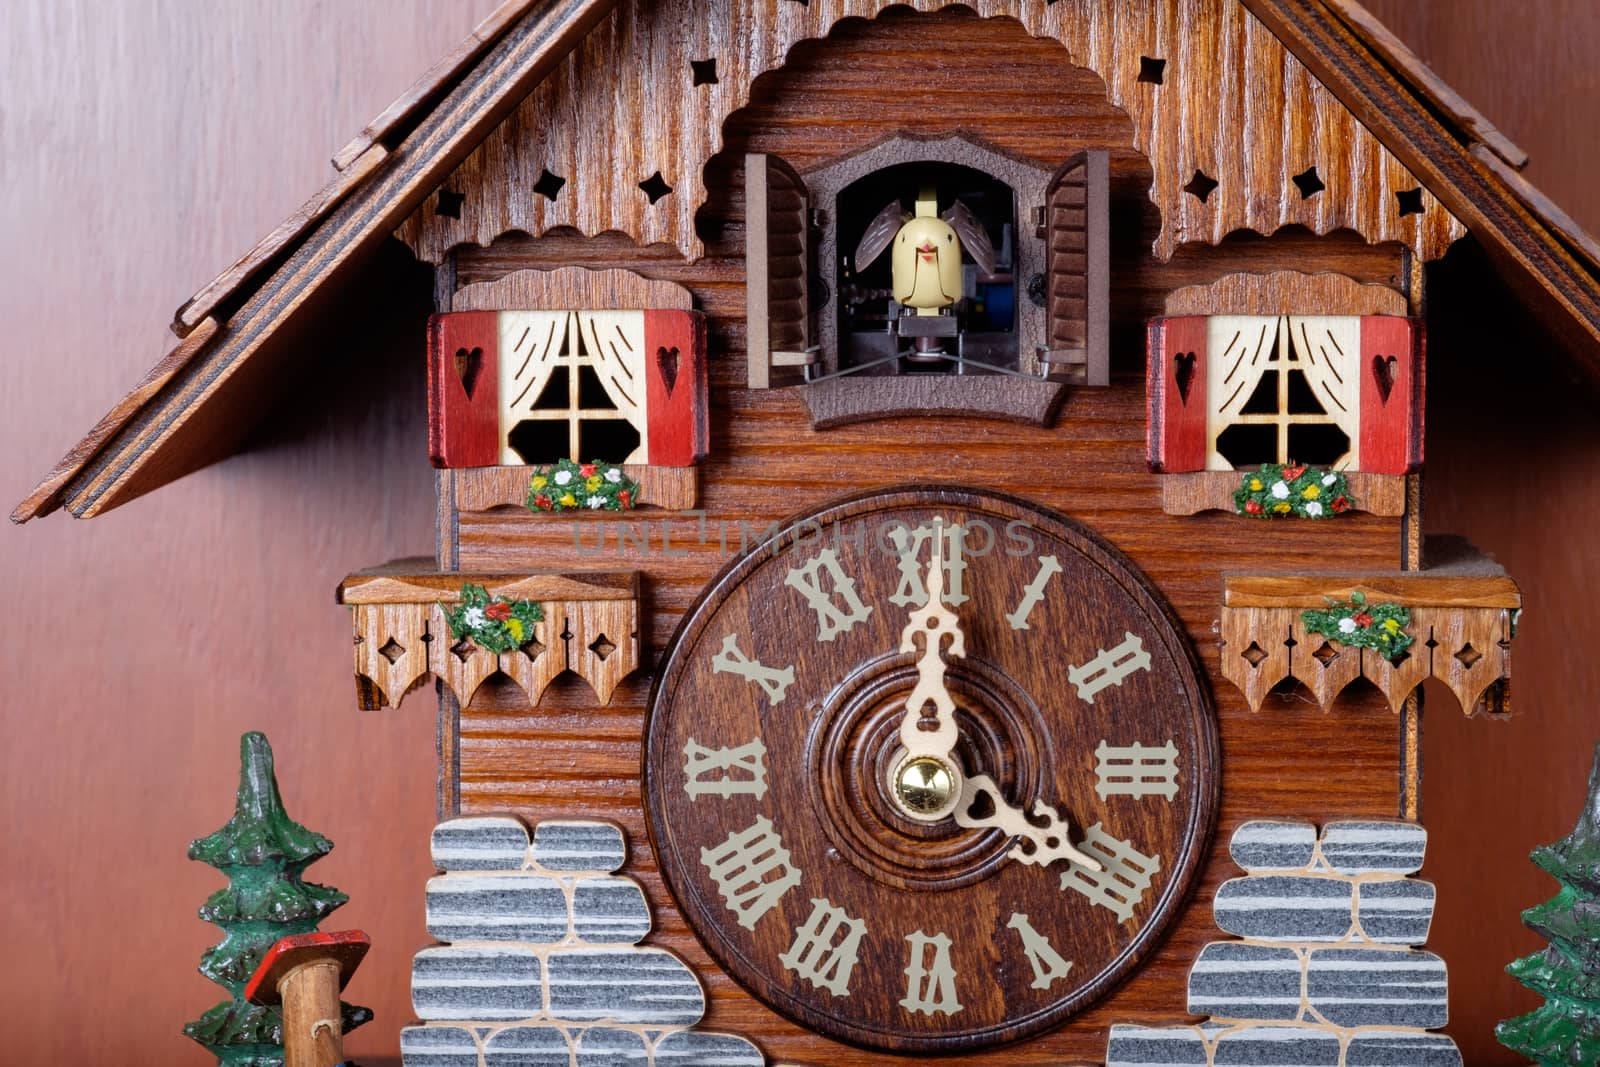 Cuckoo clock with birdie by zneb076